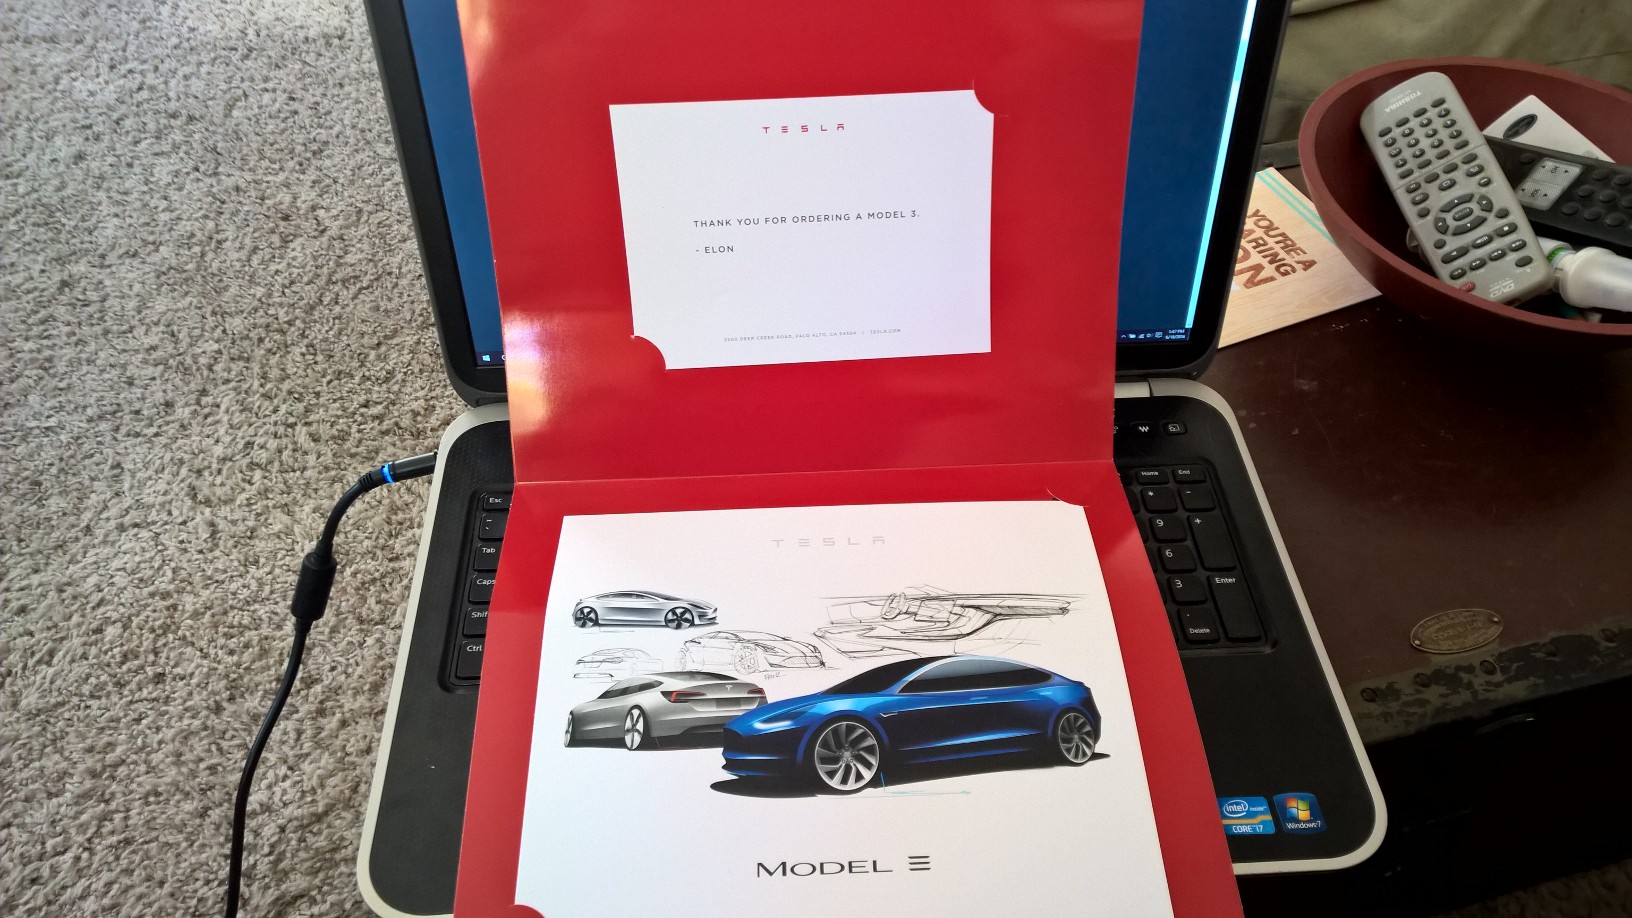 model 3 thank you gift